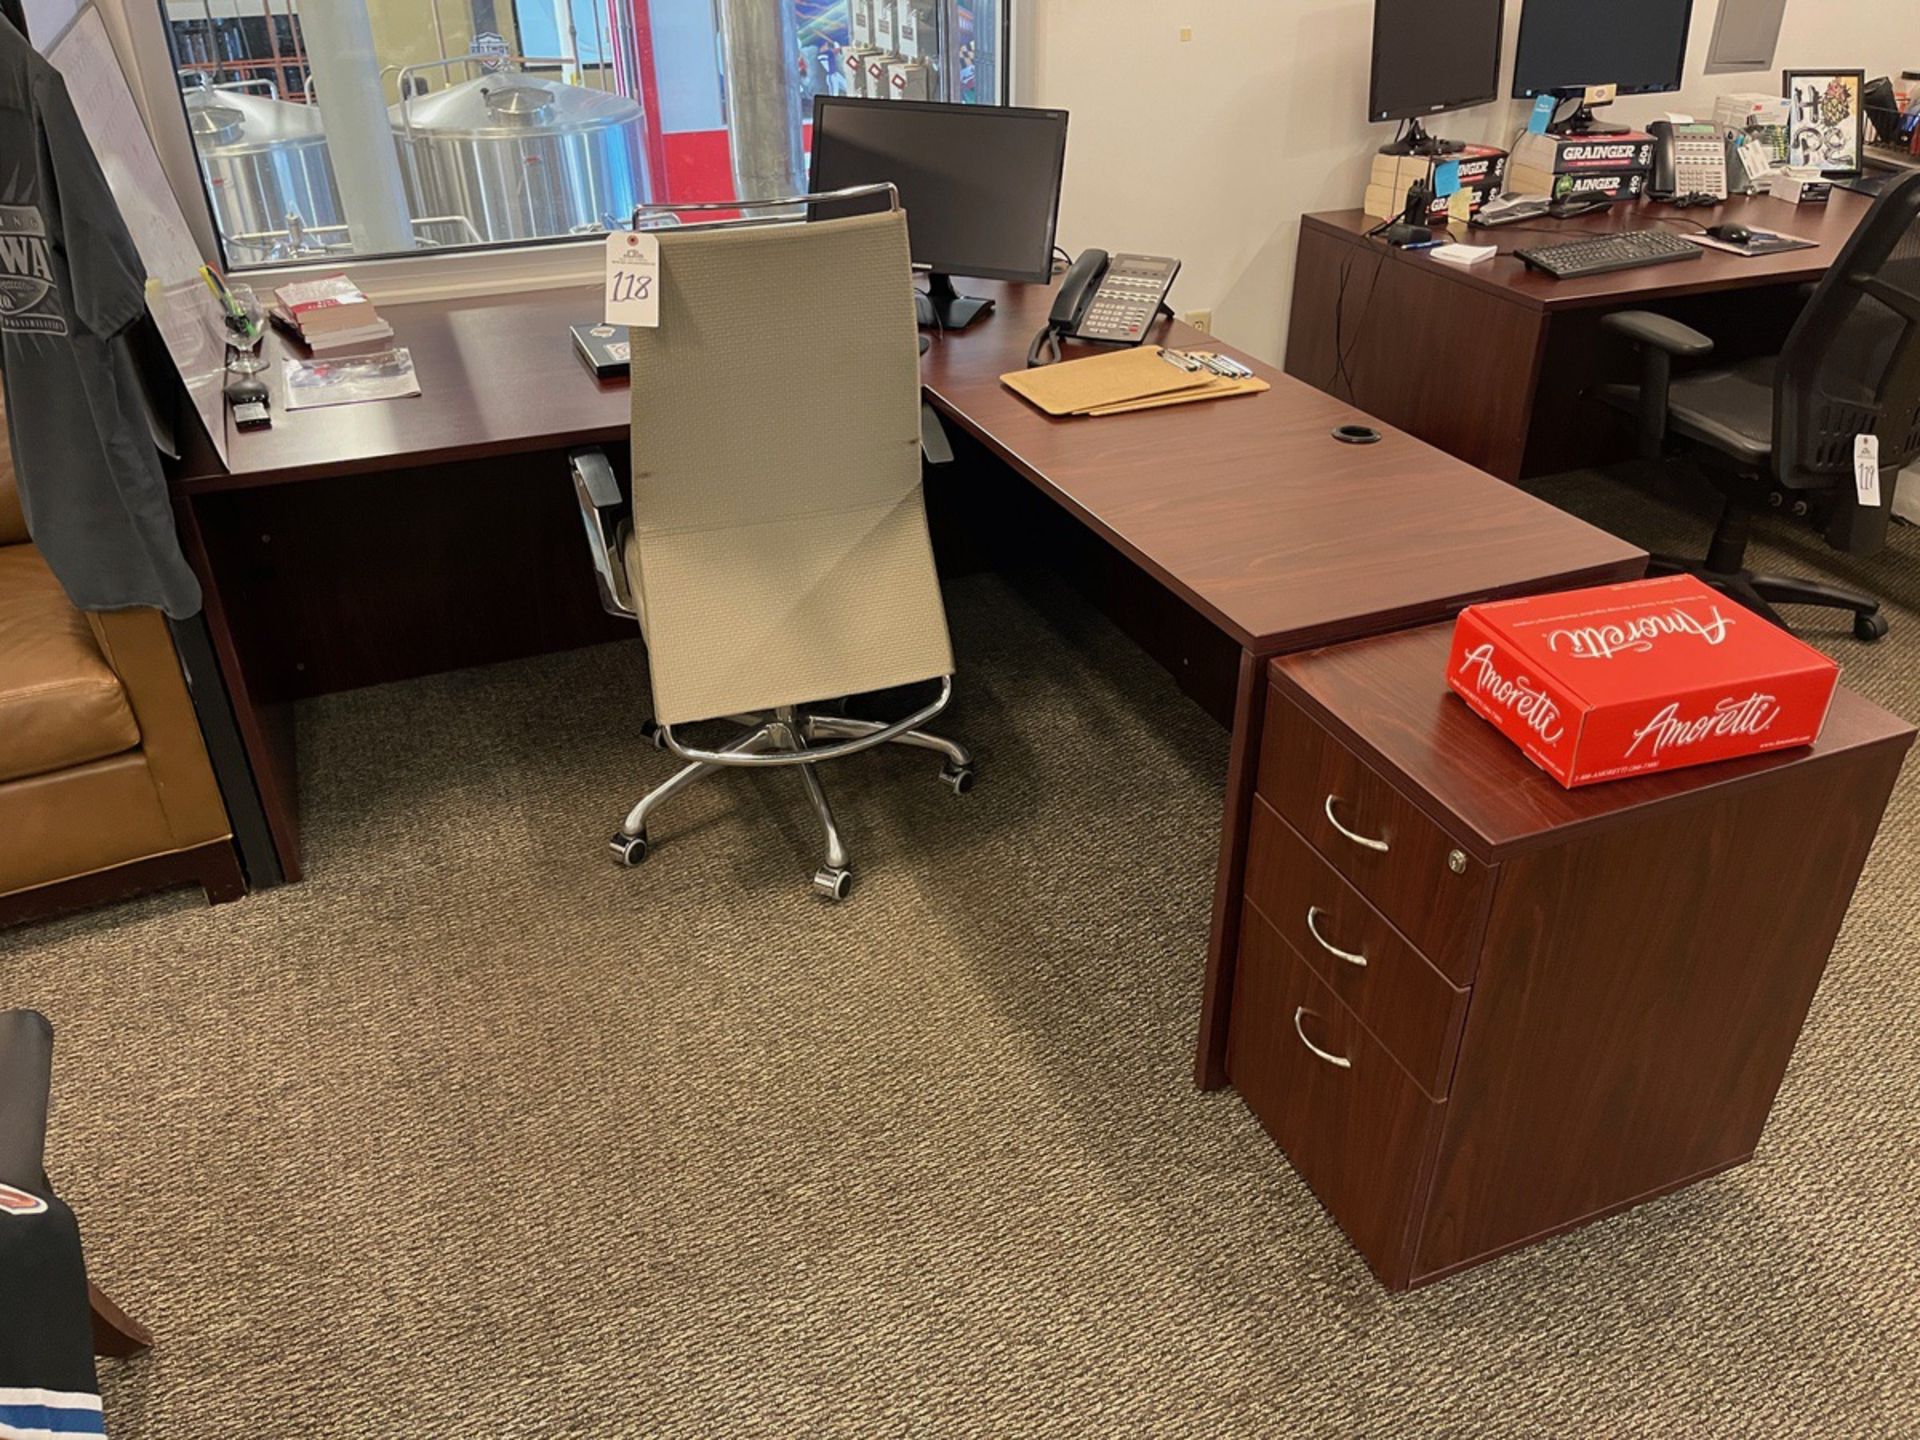 Lot of Office Furniture and Misc. Items wihin Workspace | Rig Fee $150